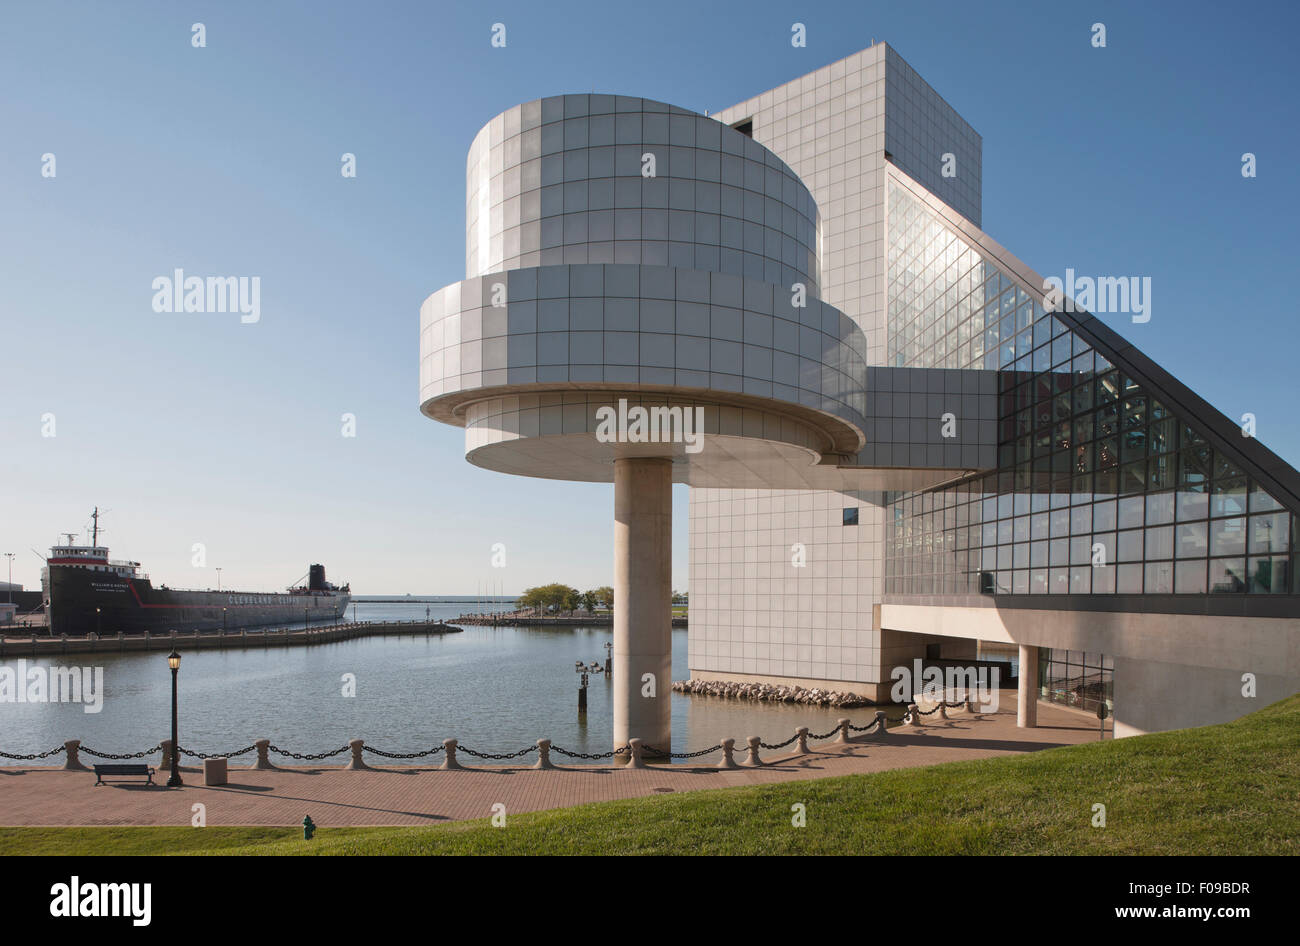 ROCK AND ROLL HALL OF FAME (©I M PEI 1995) WATERFRONT DOWNTOWN CLEVELAND OHIO USA Banque D'Images